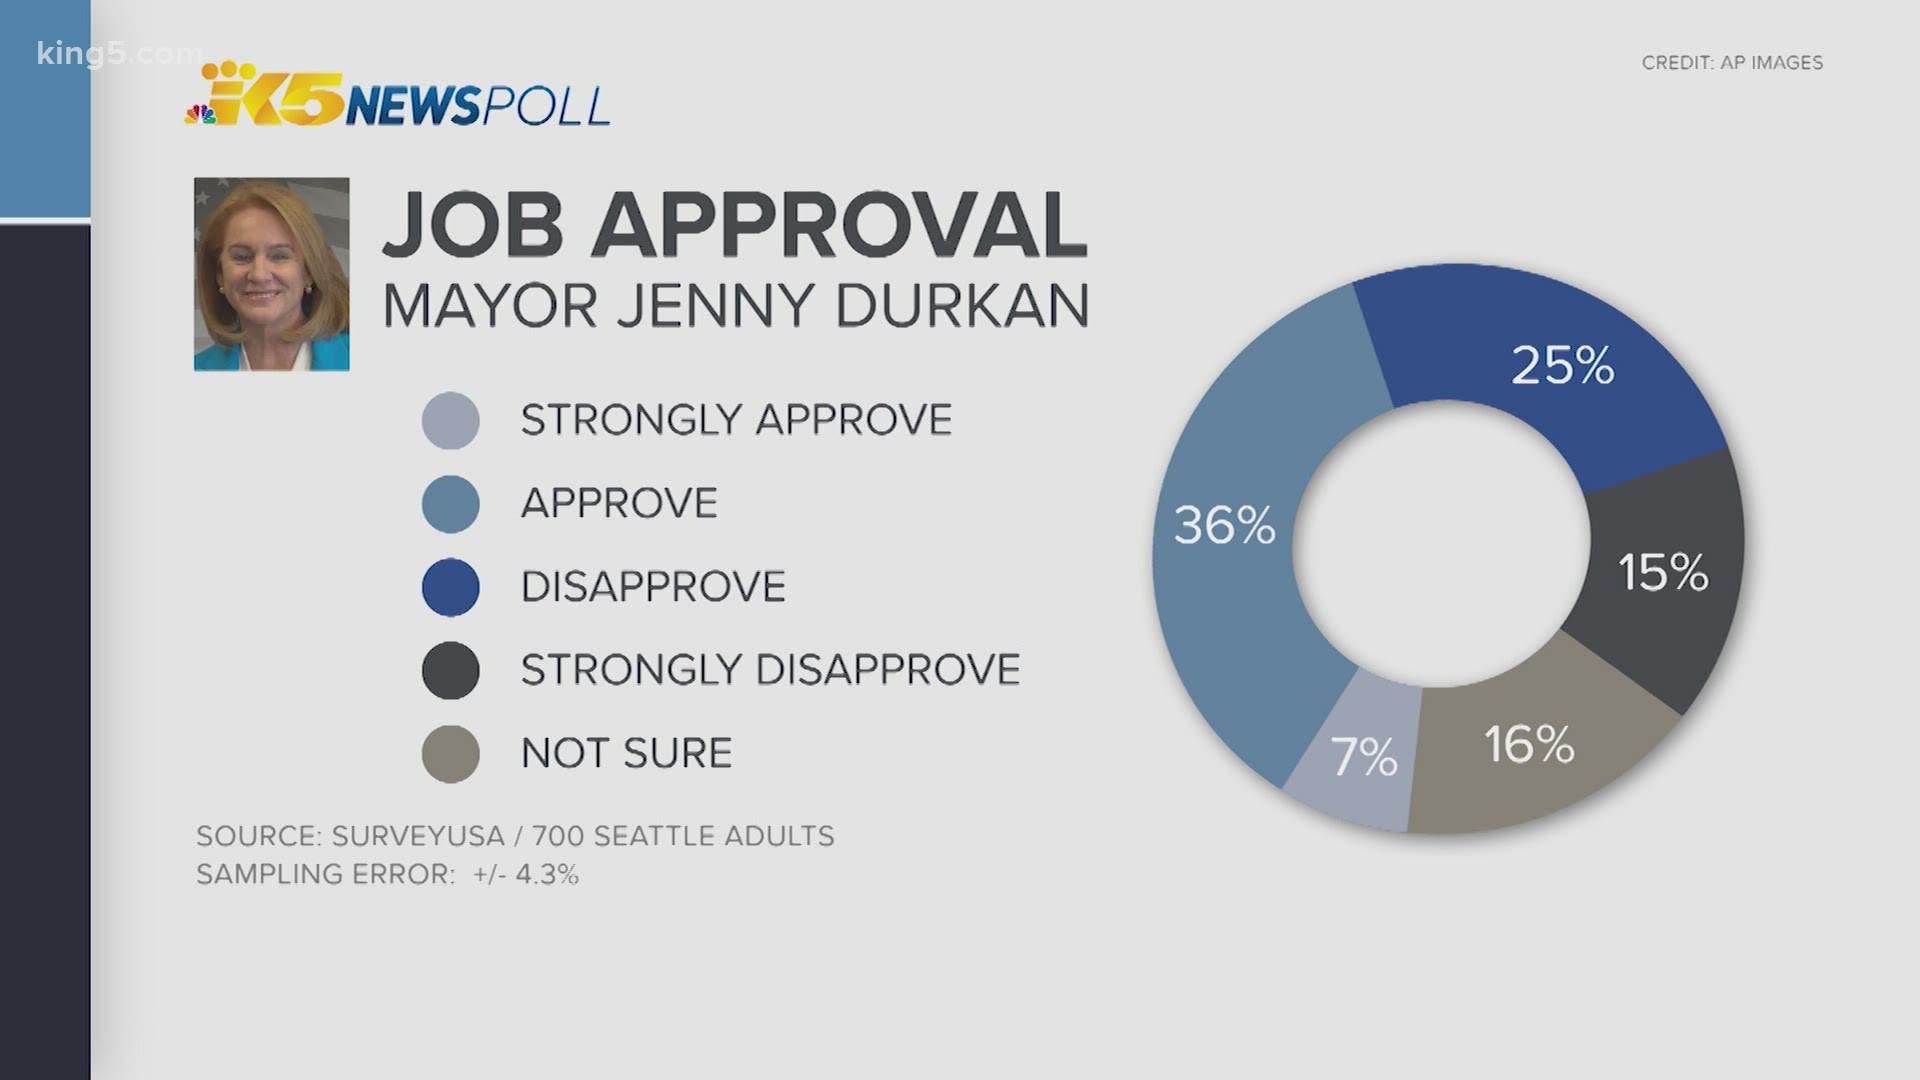 Of the 700 Seattle adults surveyed, 43% said they approved or strongly approved of the job Jenny Durkan is doing as mayor.